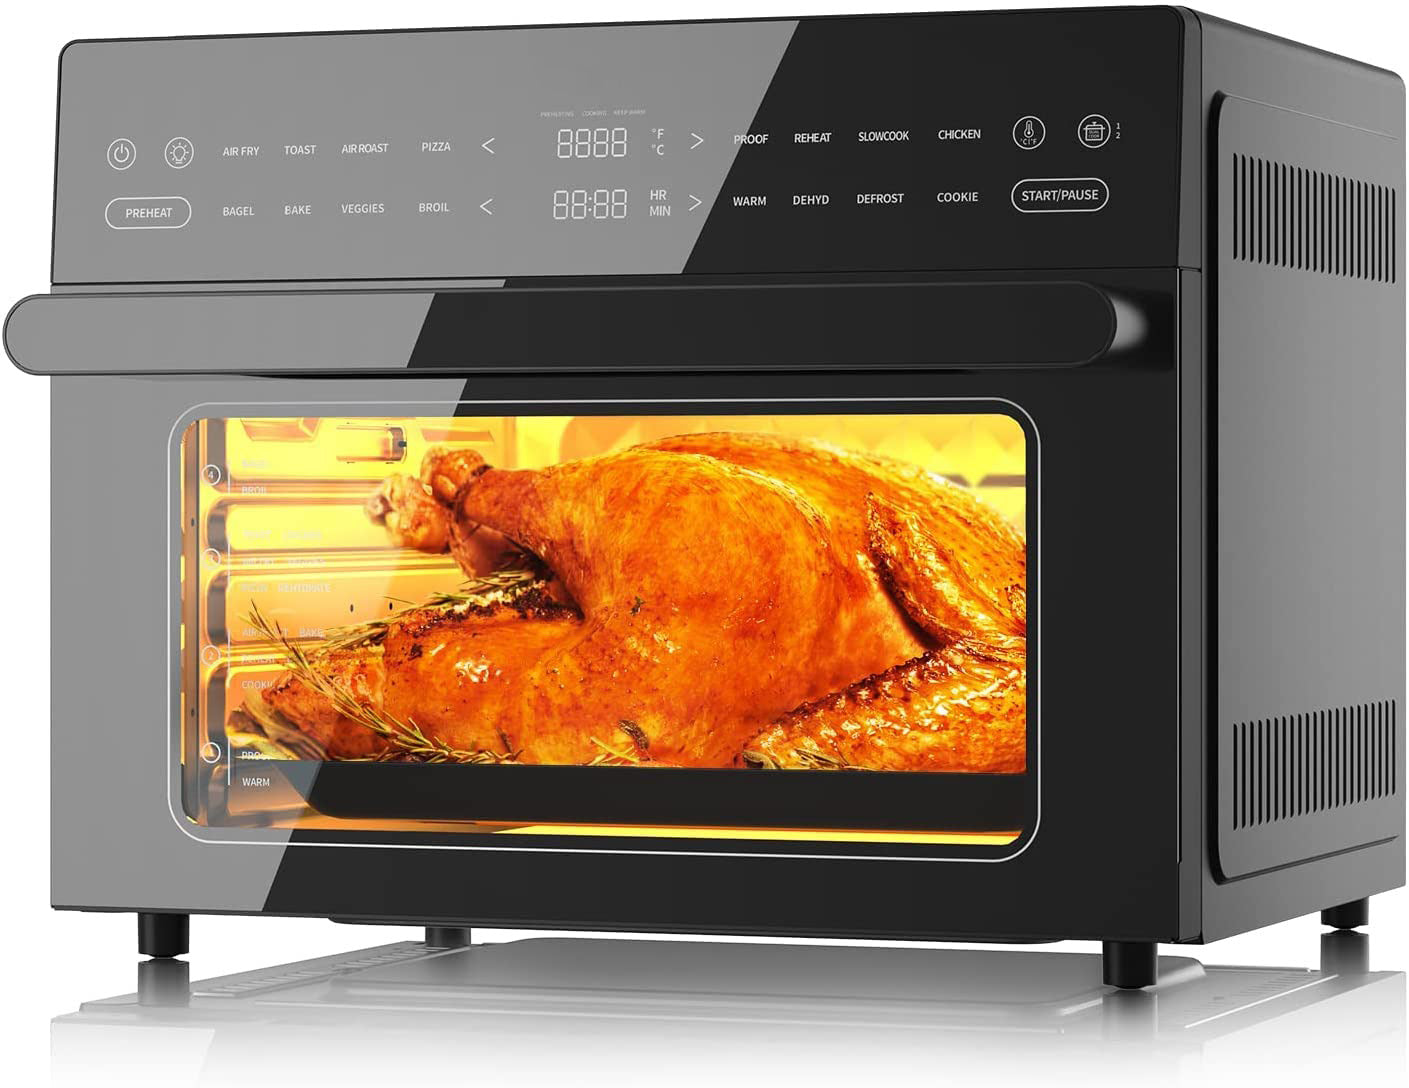 10-in-1 Countertop Convection Oven